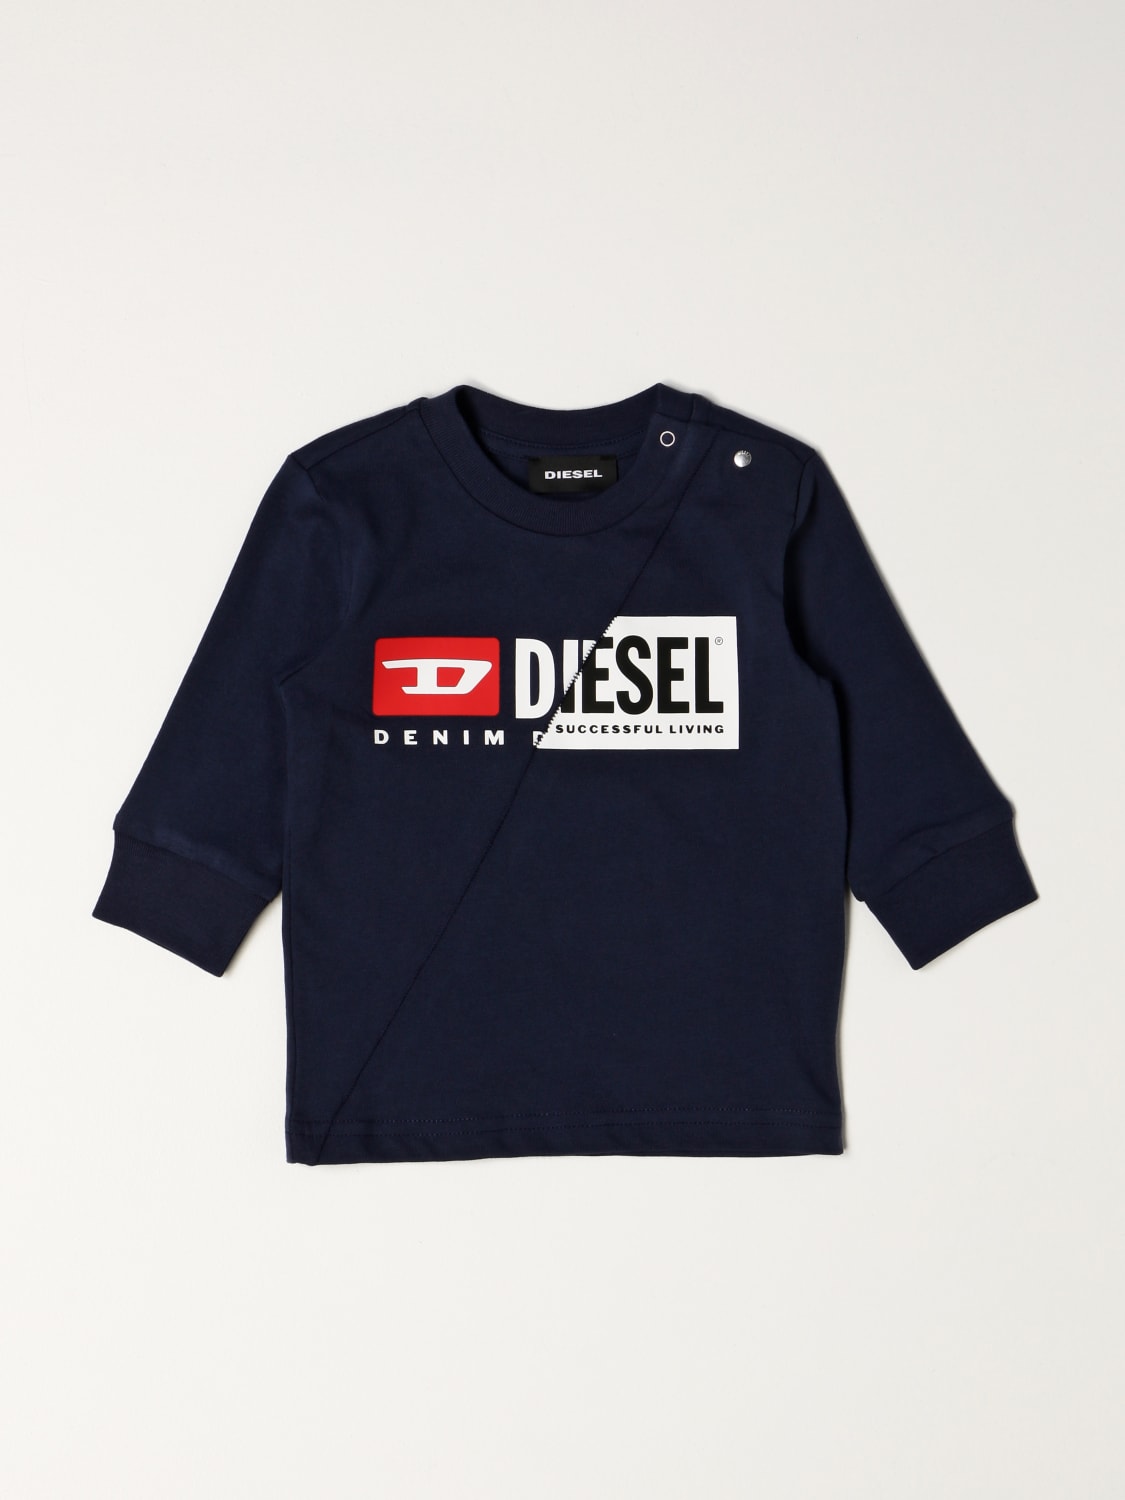 online 00K296 Outlet: at Diesel Blue | Diesel - 00YI9 logo t-shirt t-shirt with cotton